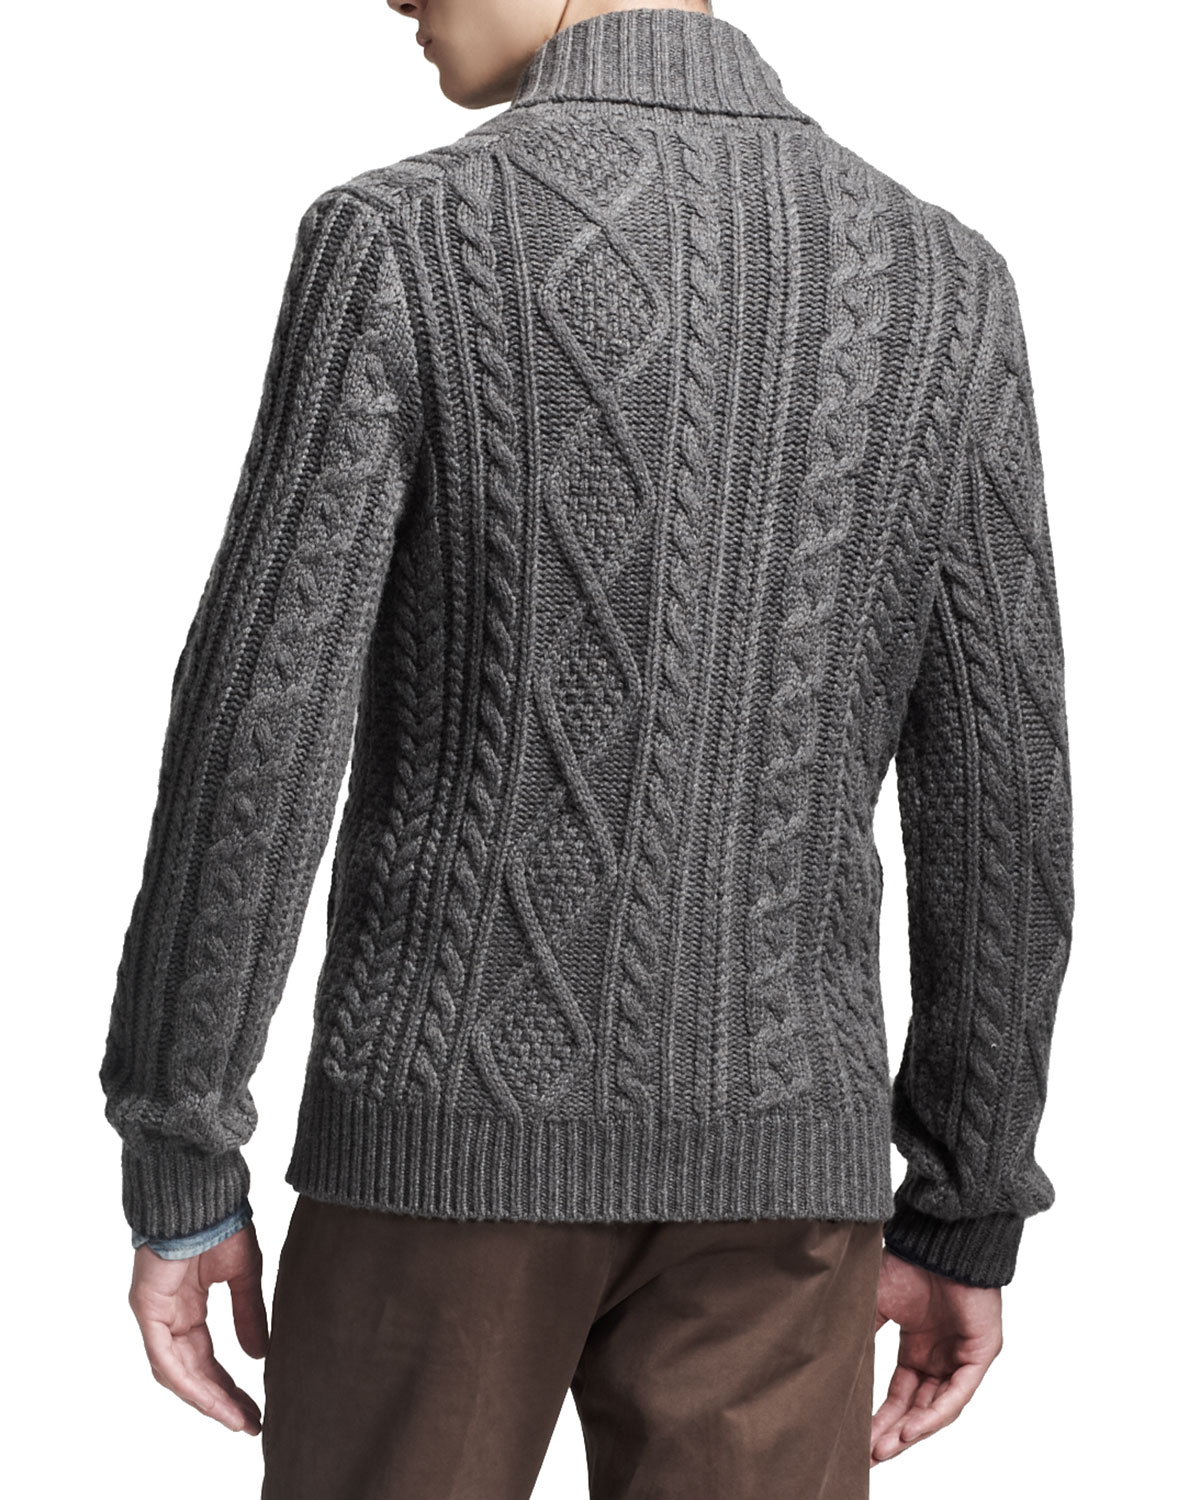 Lyst - Brunello cucinelli Cashmere Cableknit Cardigan in Gray for Men